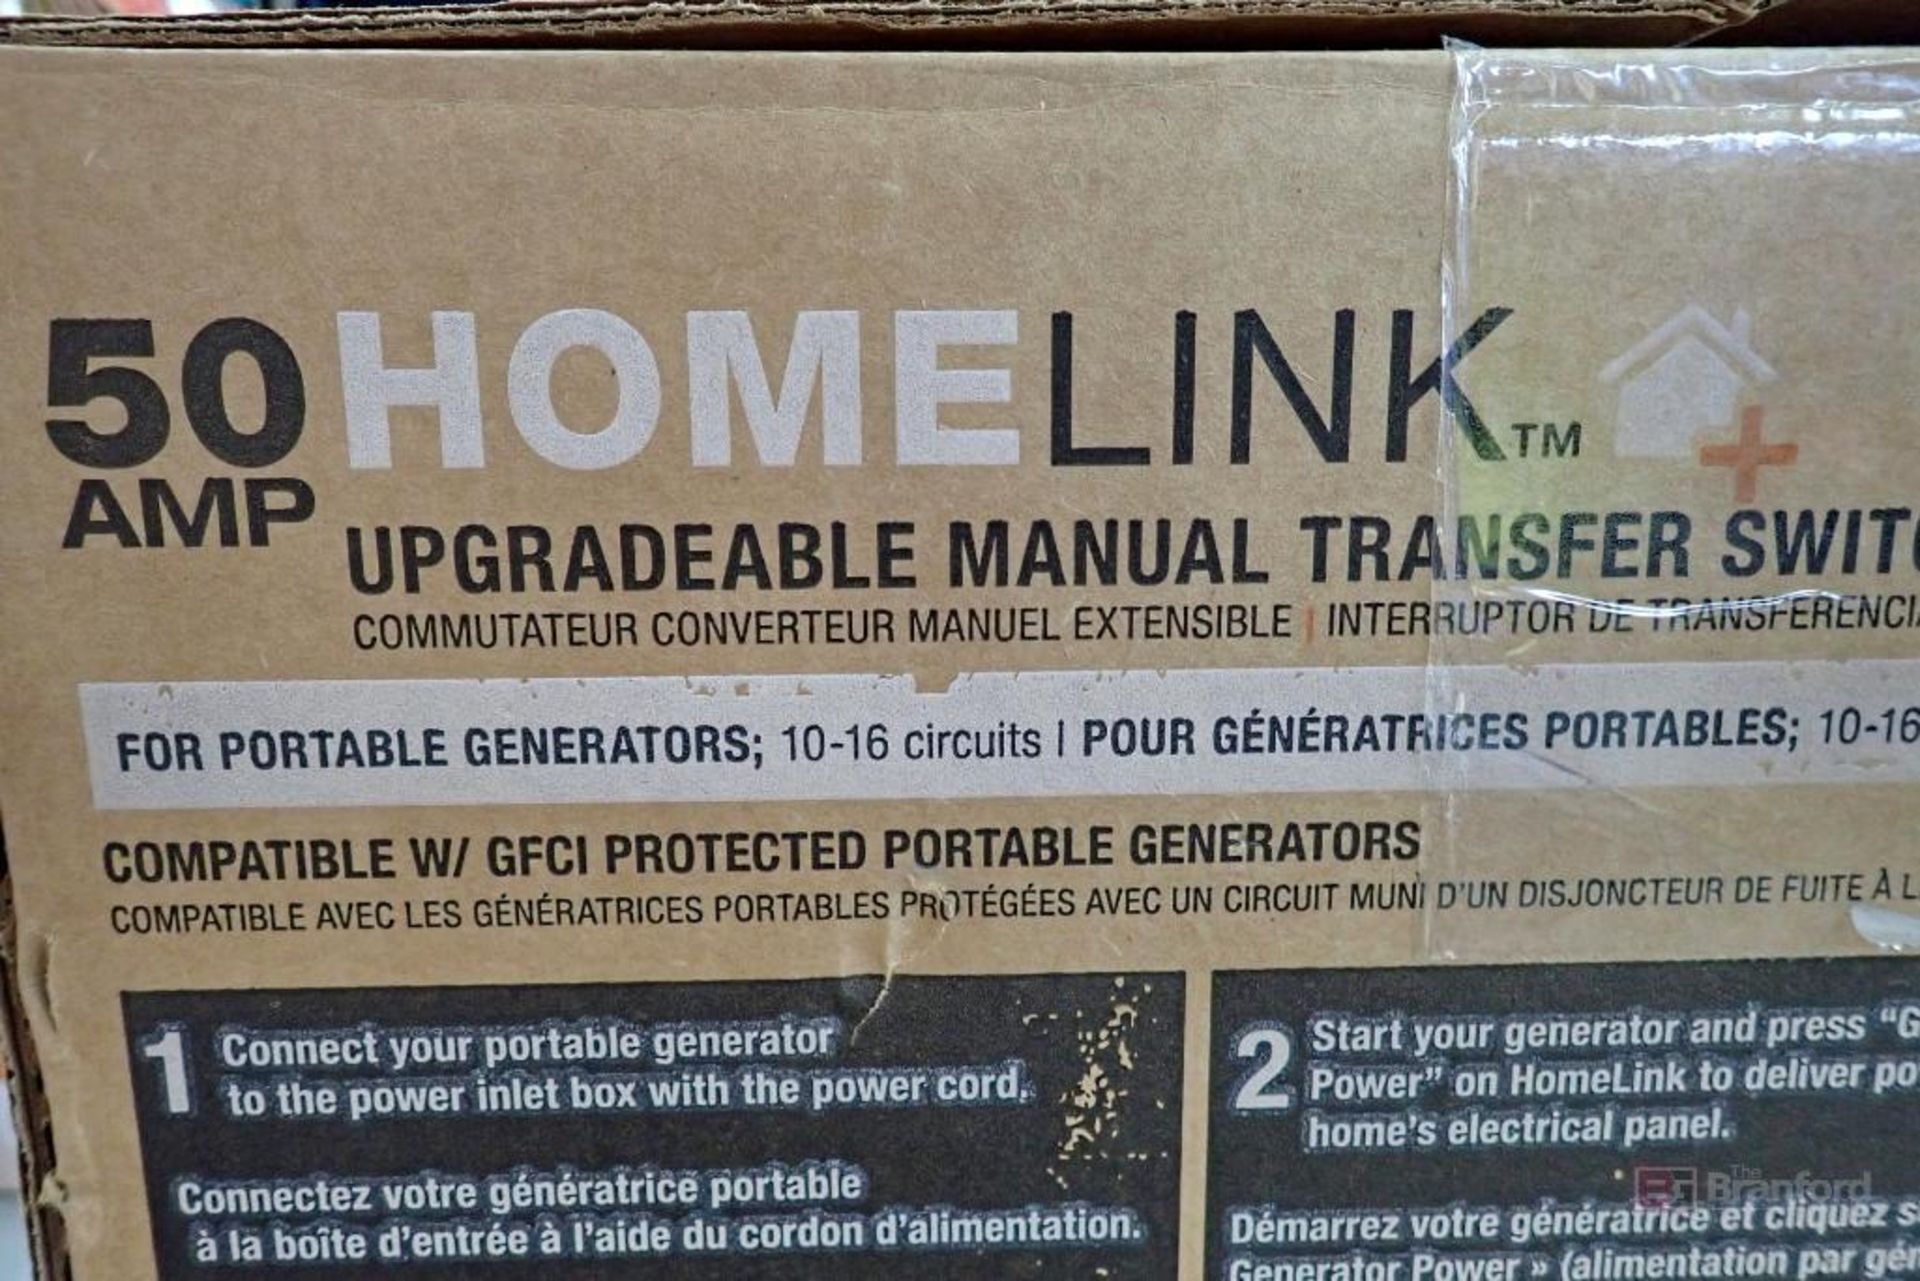 GENERAC GNR98550 HomeLink 50 AMP Upgradeable Manual Transfer Switch - Image 2 of 6